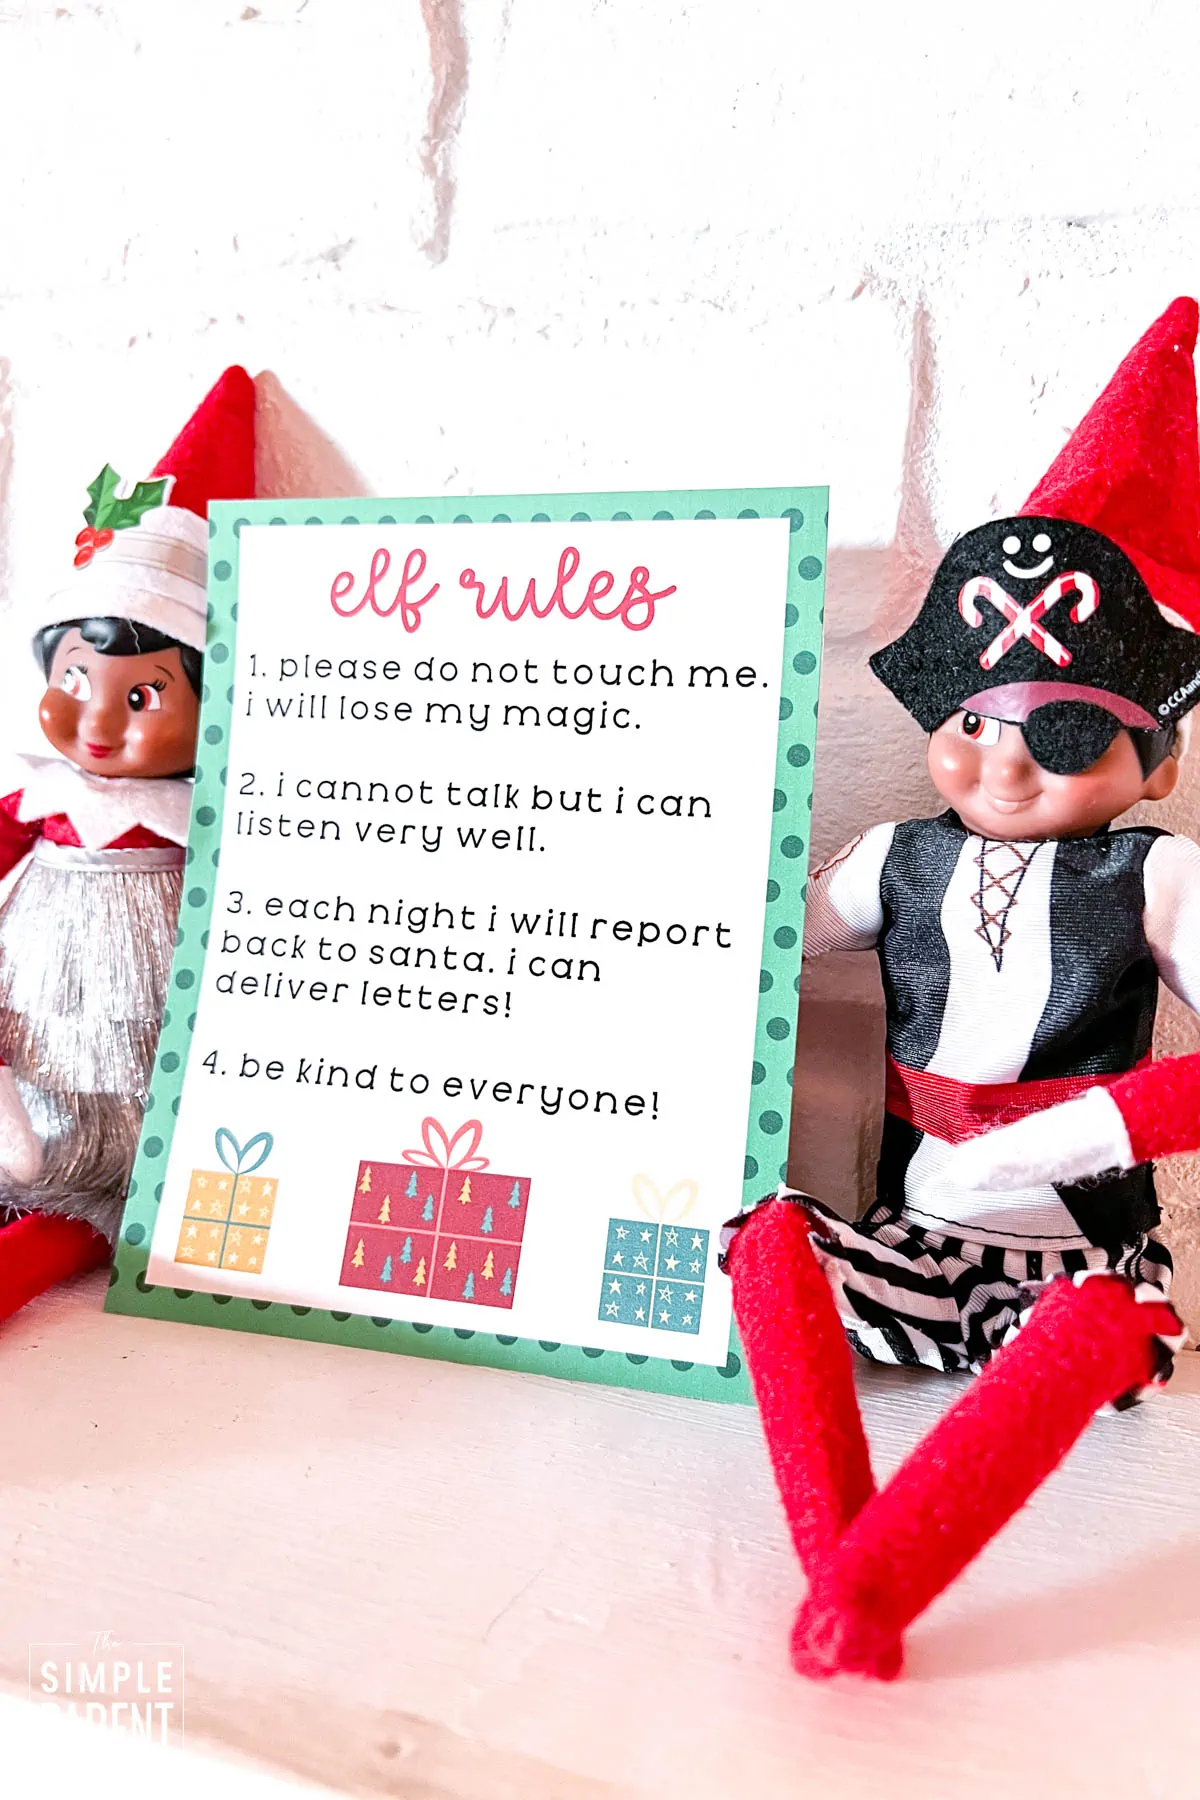 Elf on the shelf dressed as a pirate sitting on fireplace mantle